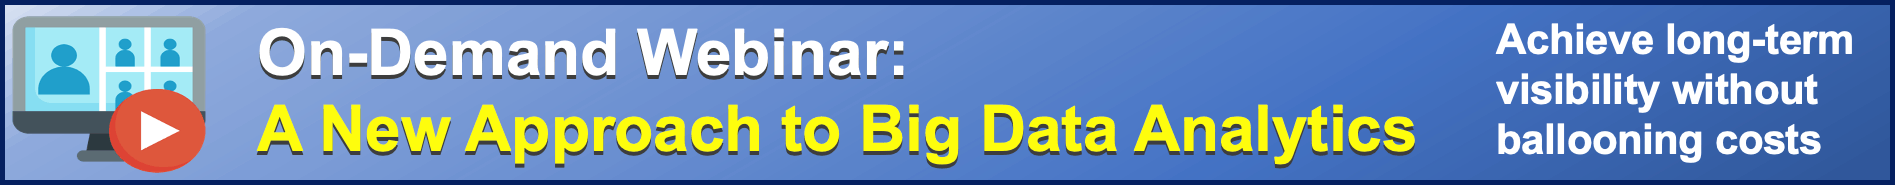 On-Demand Webinar: A New Approach to Big Data Analytics. Achieve long-term visibility without ballooning costs.